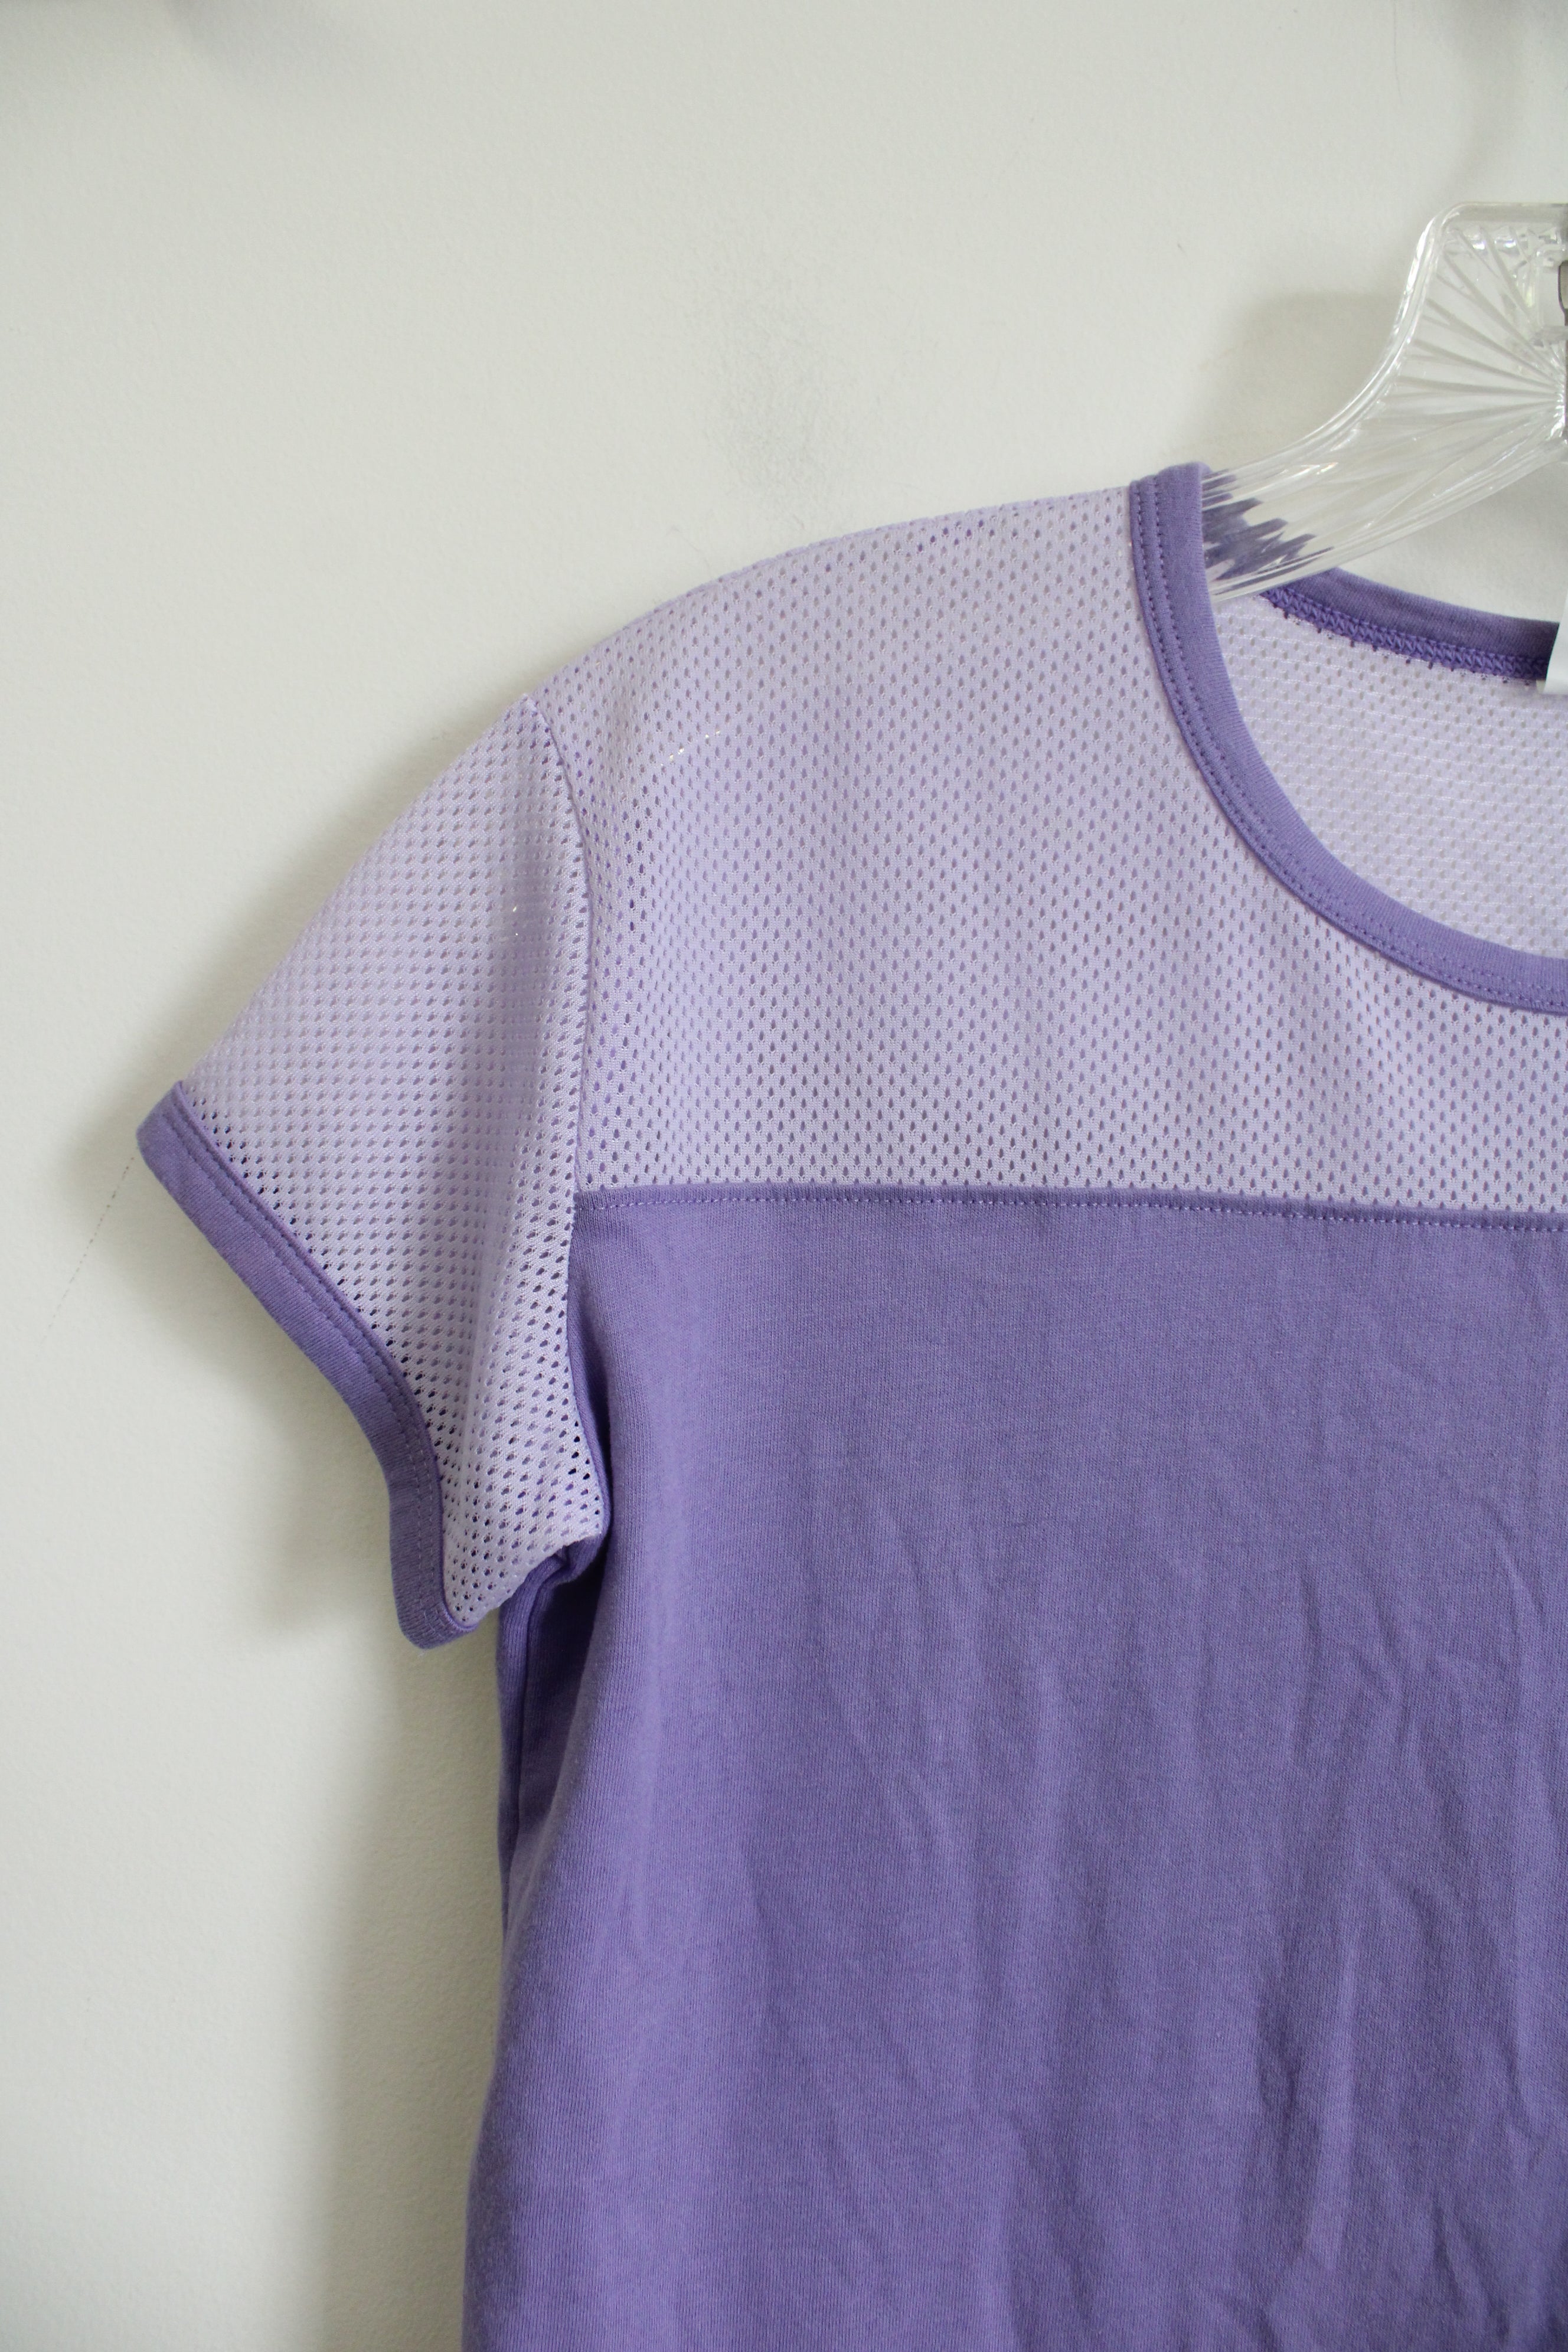 Under Armour HeatGear Loose Fit Purple Mesh Shirt | Youth M (10/12)